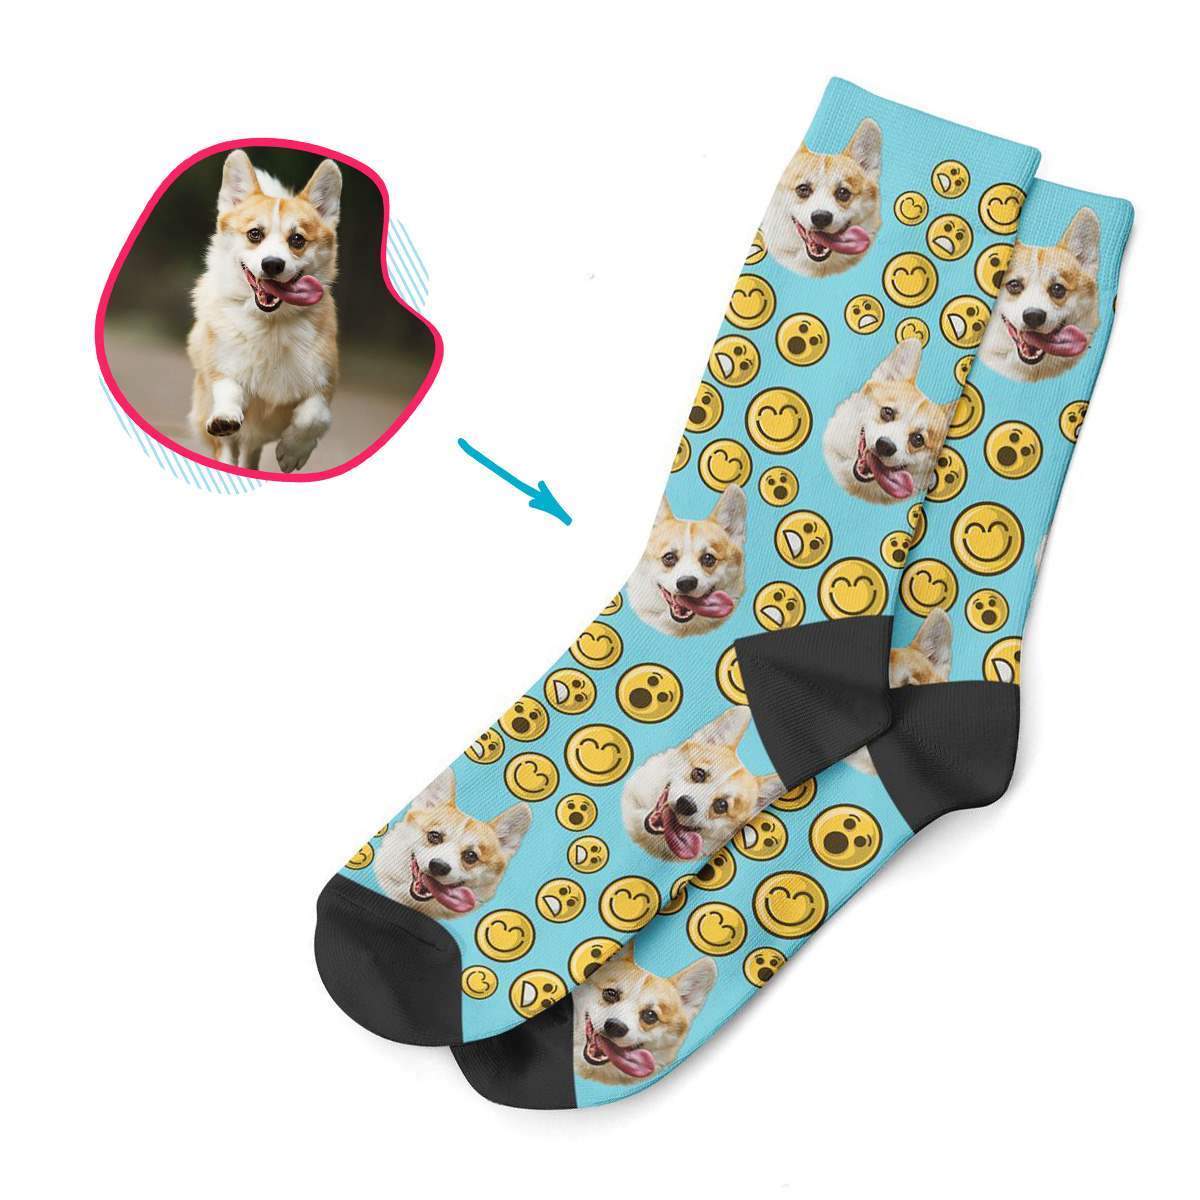 blue Smiles socks personalized with photo of face printed on them